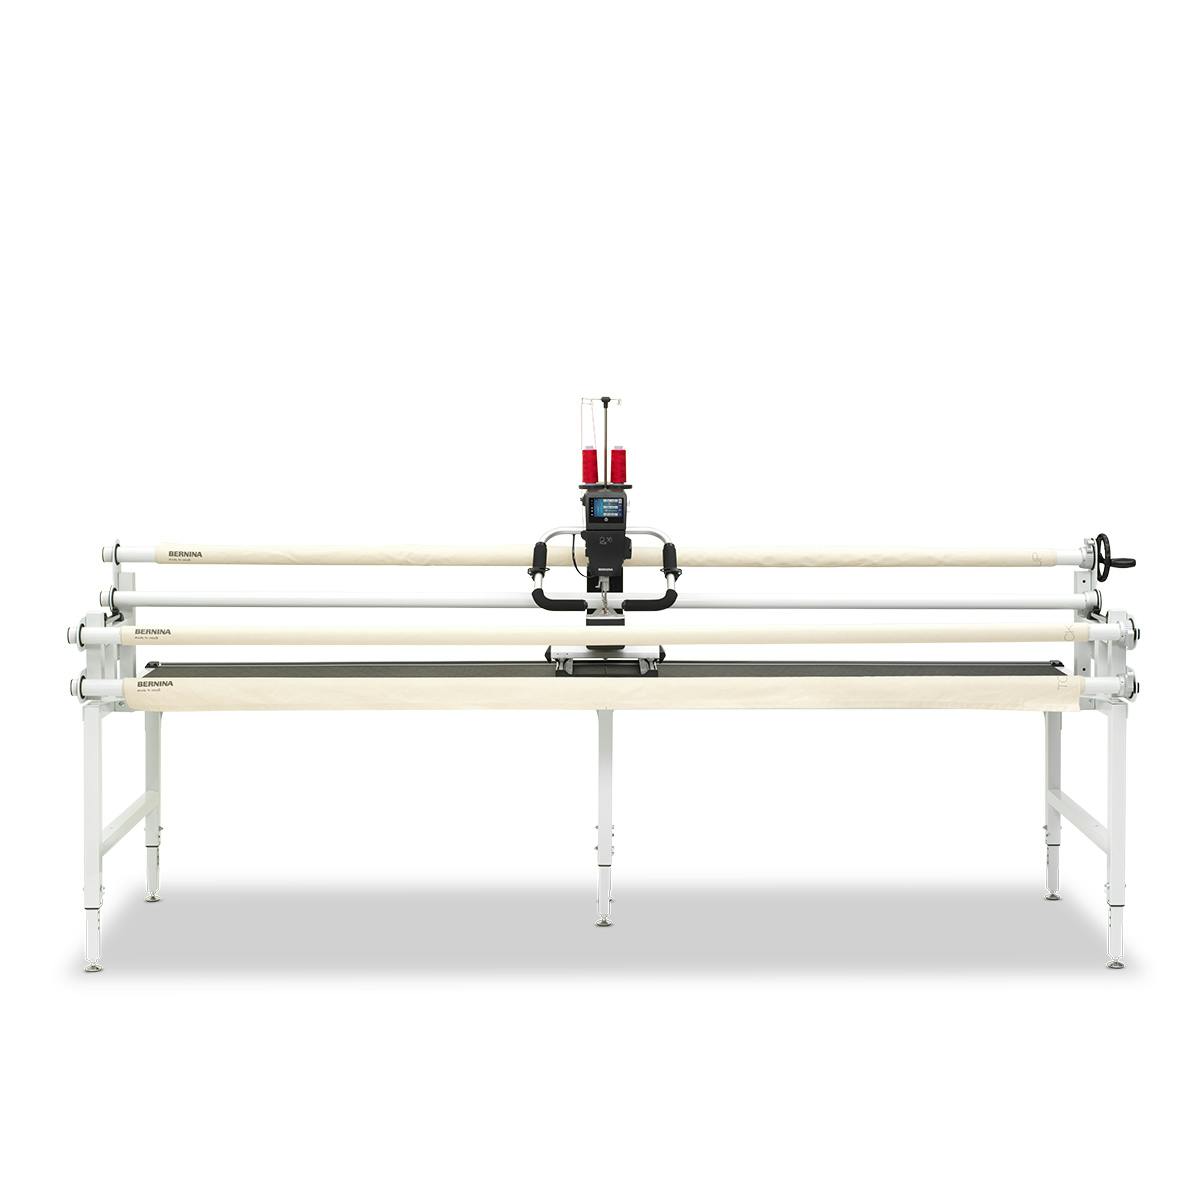 Bernina Longarm Quilting Frame 5ft or 10ft $1500 - For Sale - Used Quilting  Machines - APQS Forums